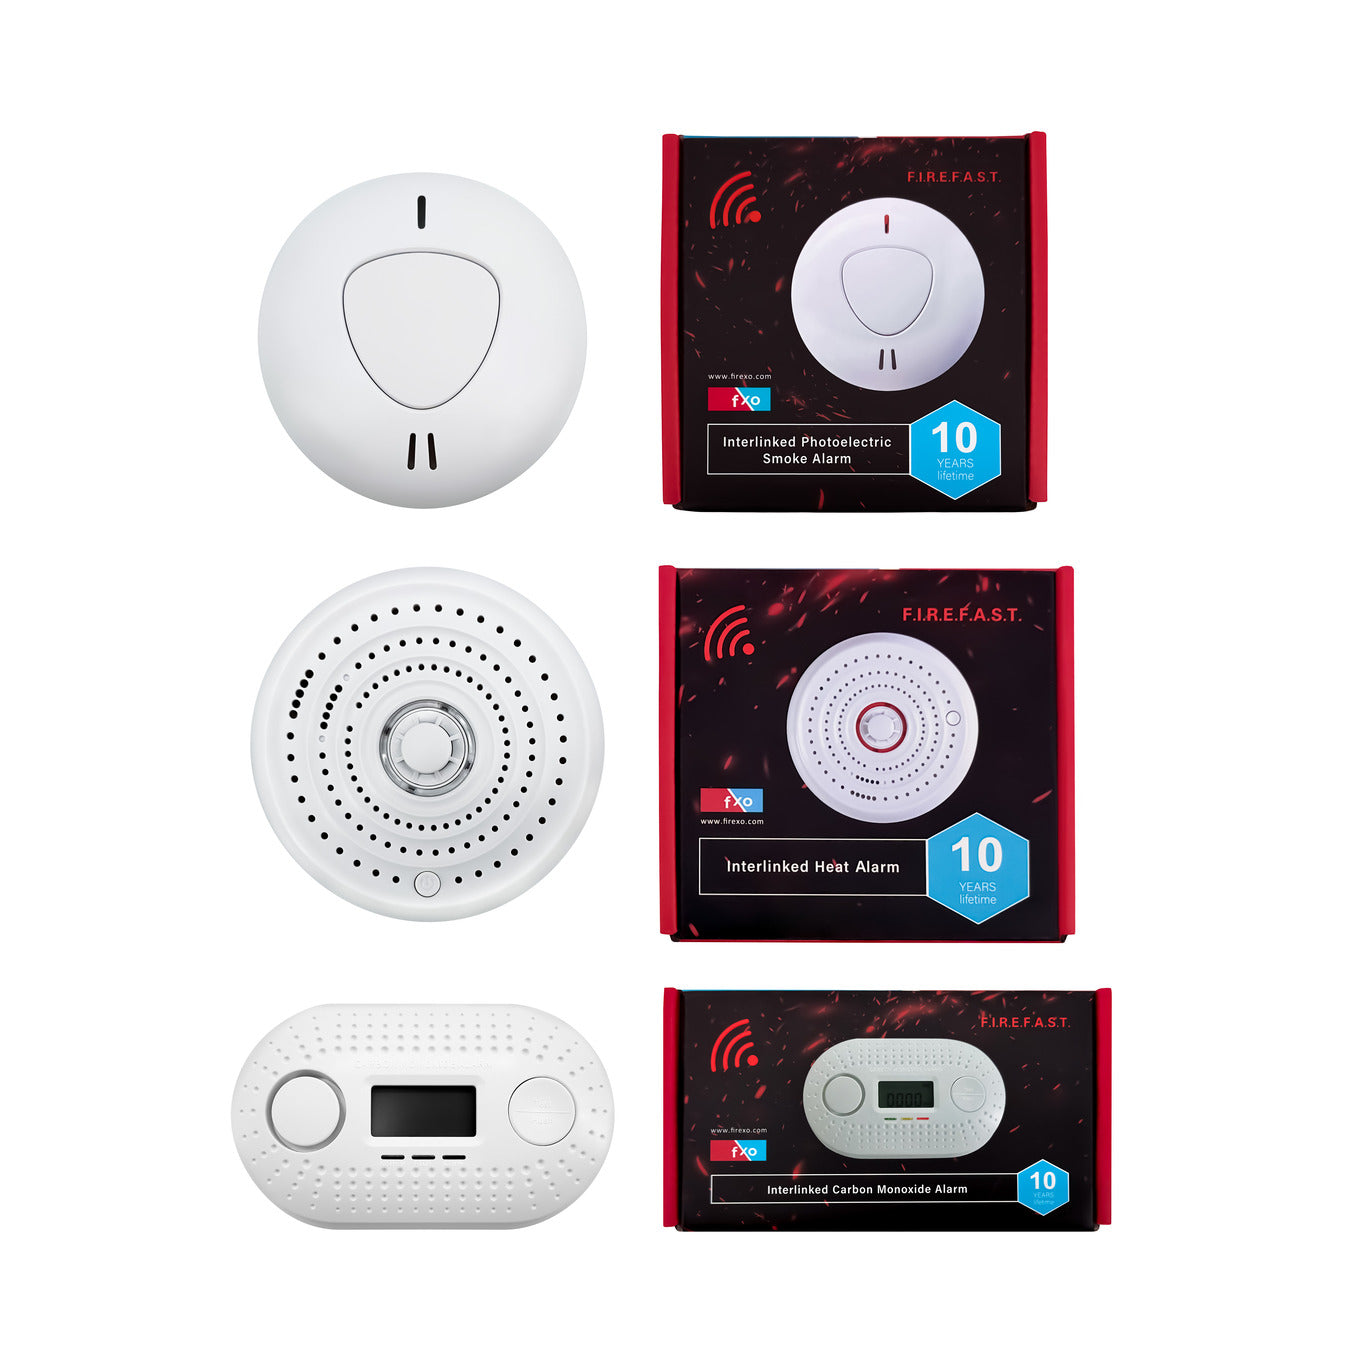 Firexo Interlinked Optical Smoke Alarm, Heat Alarm, and Carbon Monoxide Alarm Multipack all with 10 Year Tamper Proof Battery, White, Contains 1x Smoke Alarm, 1x Heat Alarm, 1x Carbon Monoxide alarm